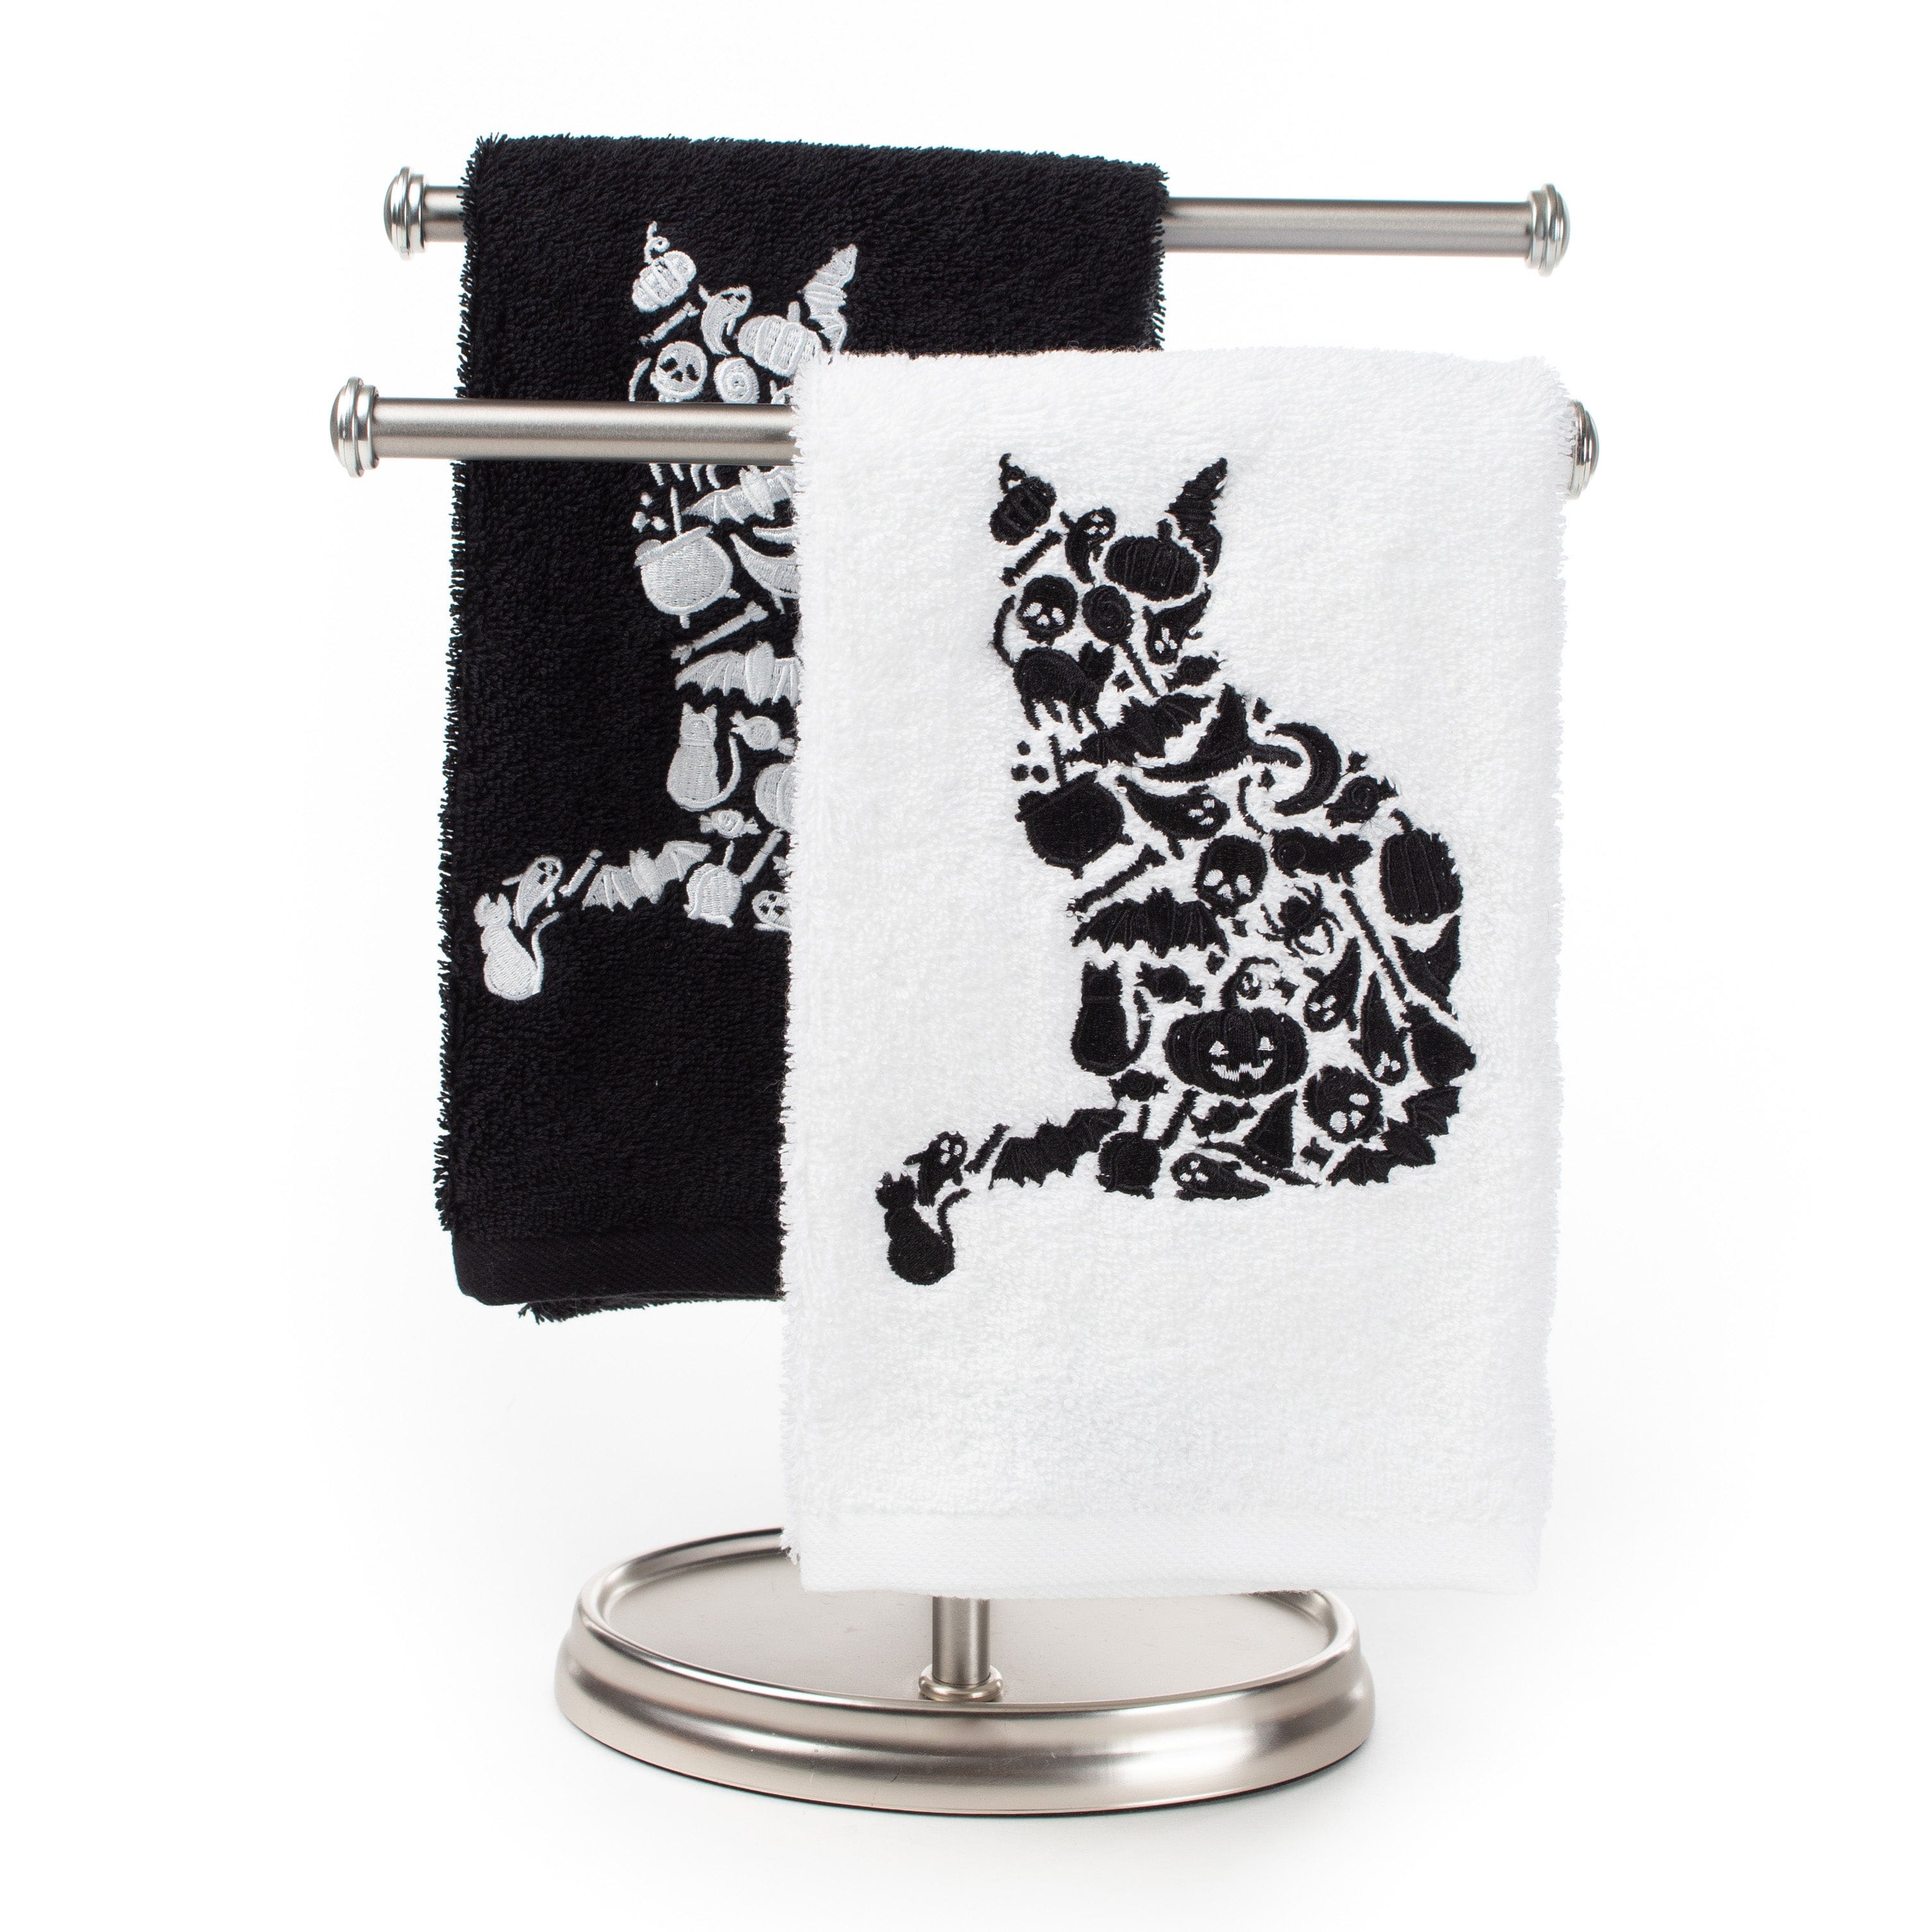 Checkered Hand Towel Black and White Kitchen Towels Cat Themed